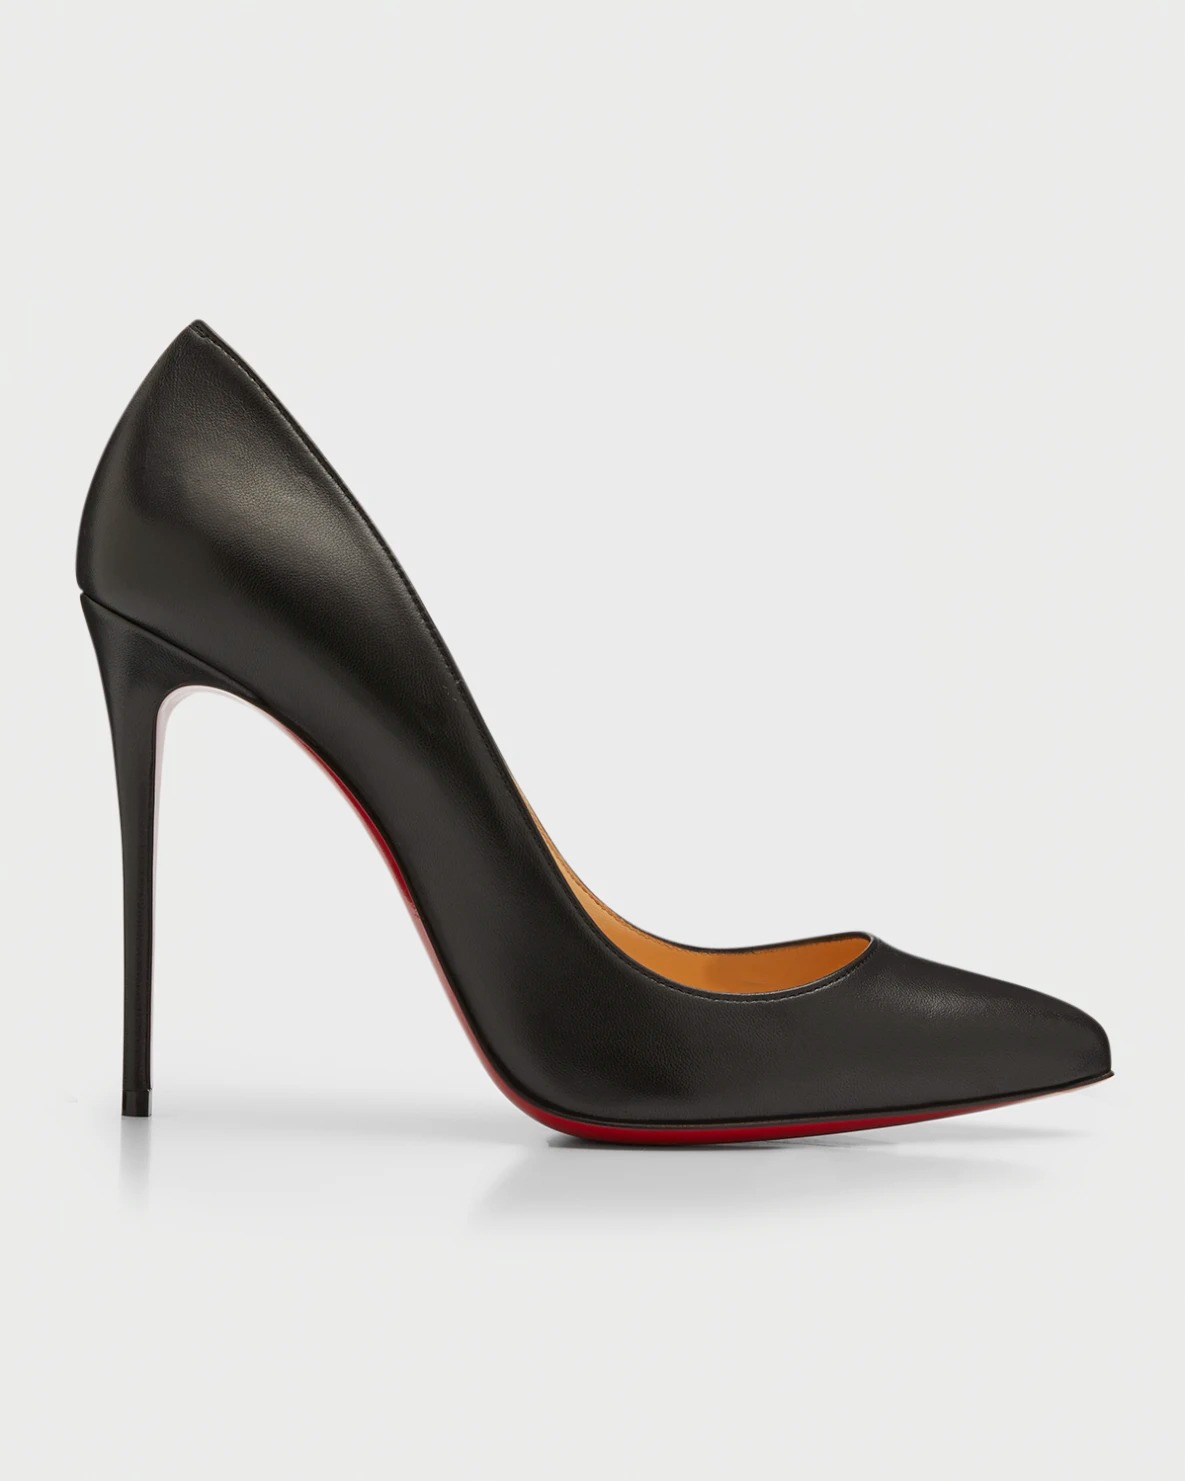 Christian Louboutin Pigalle Follies Leather 100mm Red Sole High-Heel Pumps